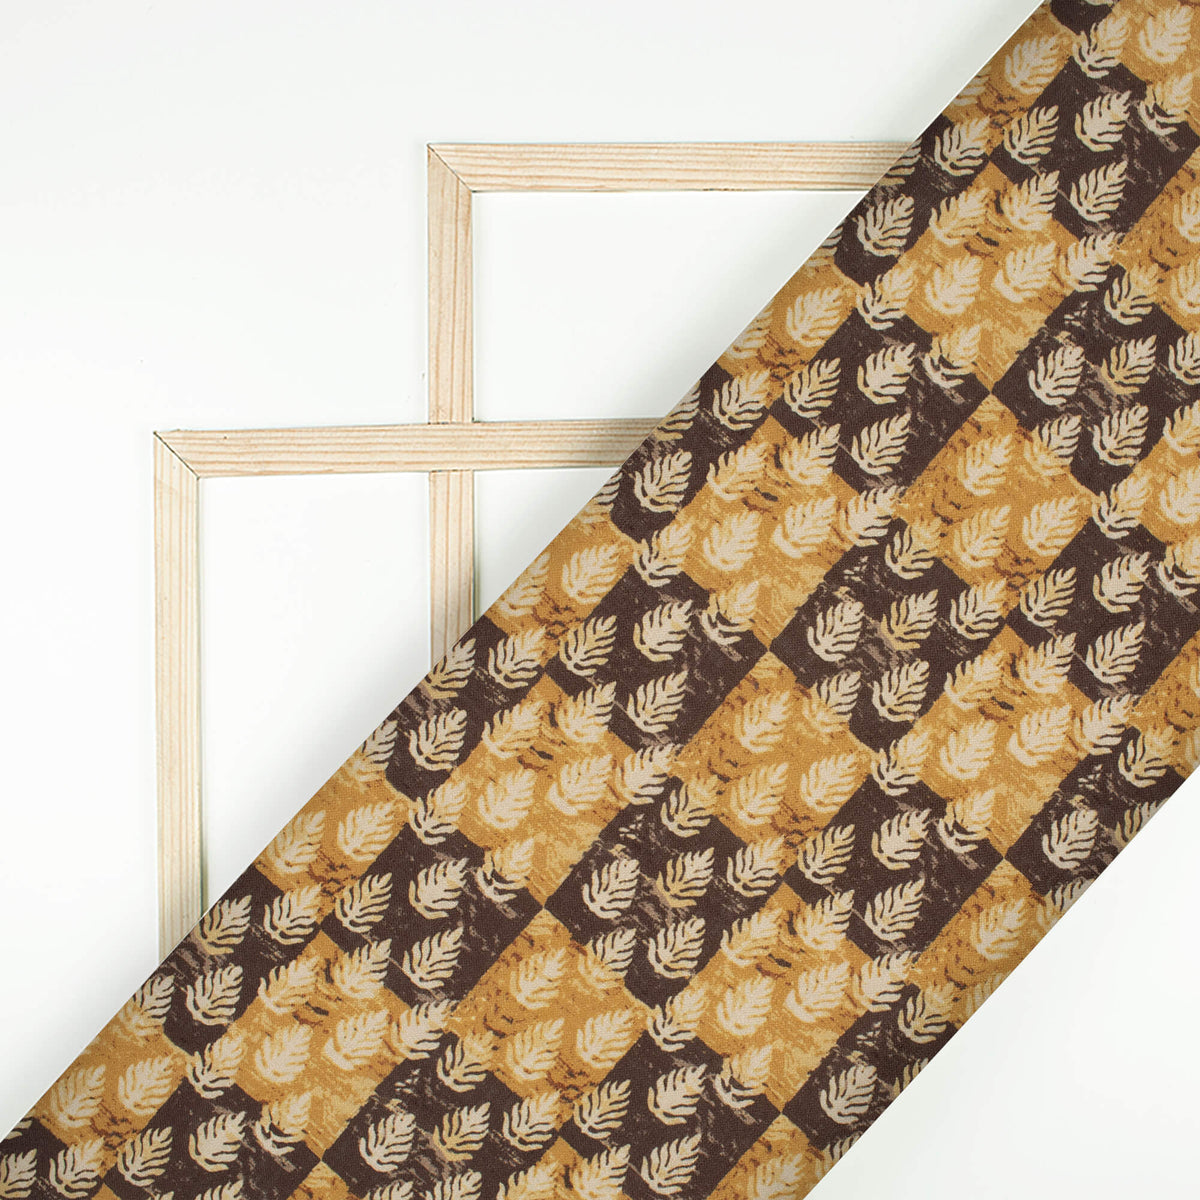 Ochre Yellow And Black Leaf Pattern Digital Print Linen Textured Fabric (Width 56 Inches)